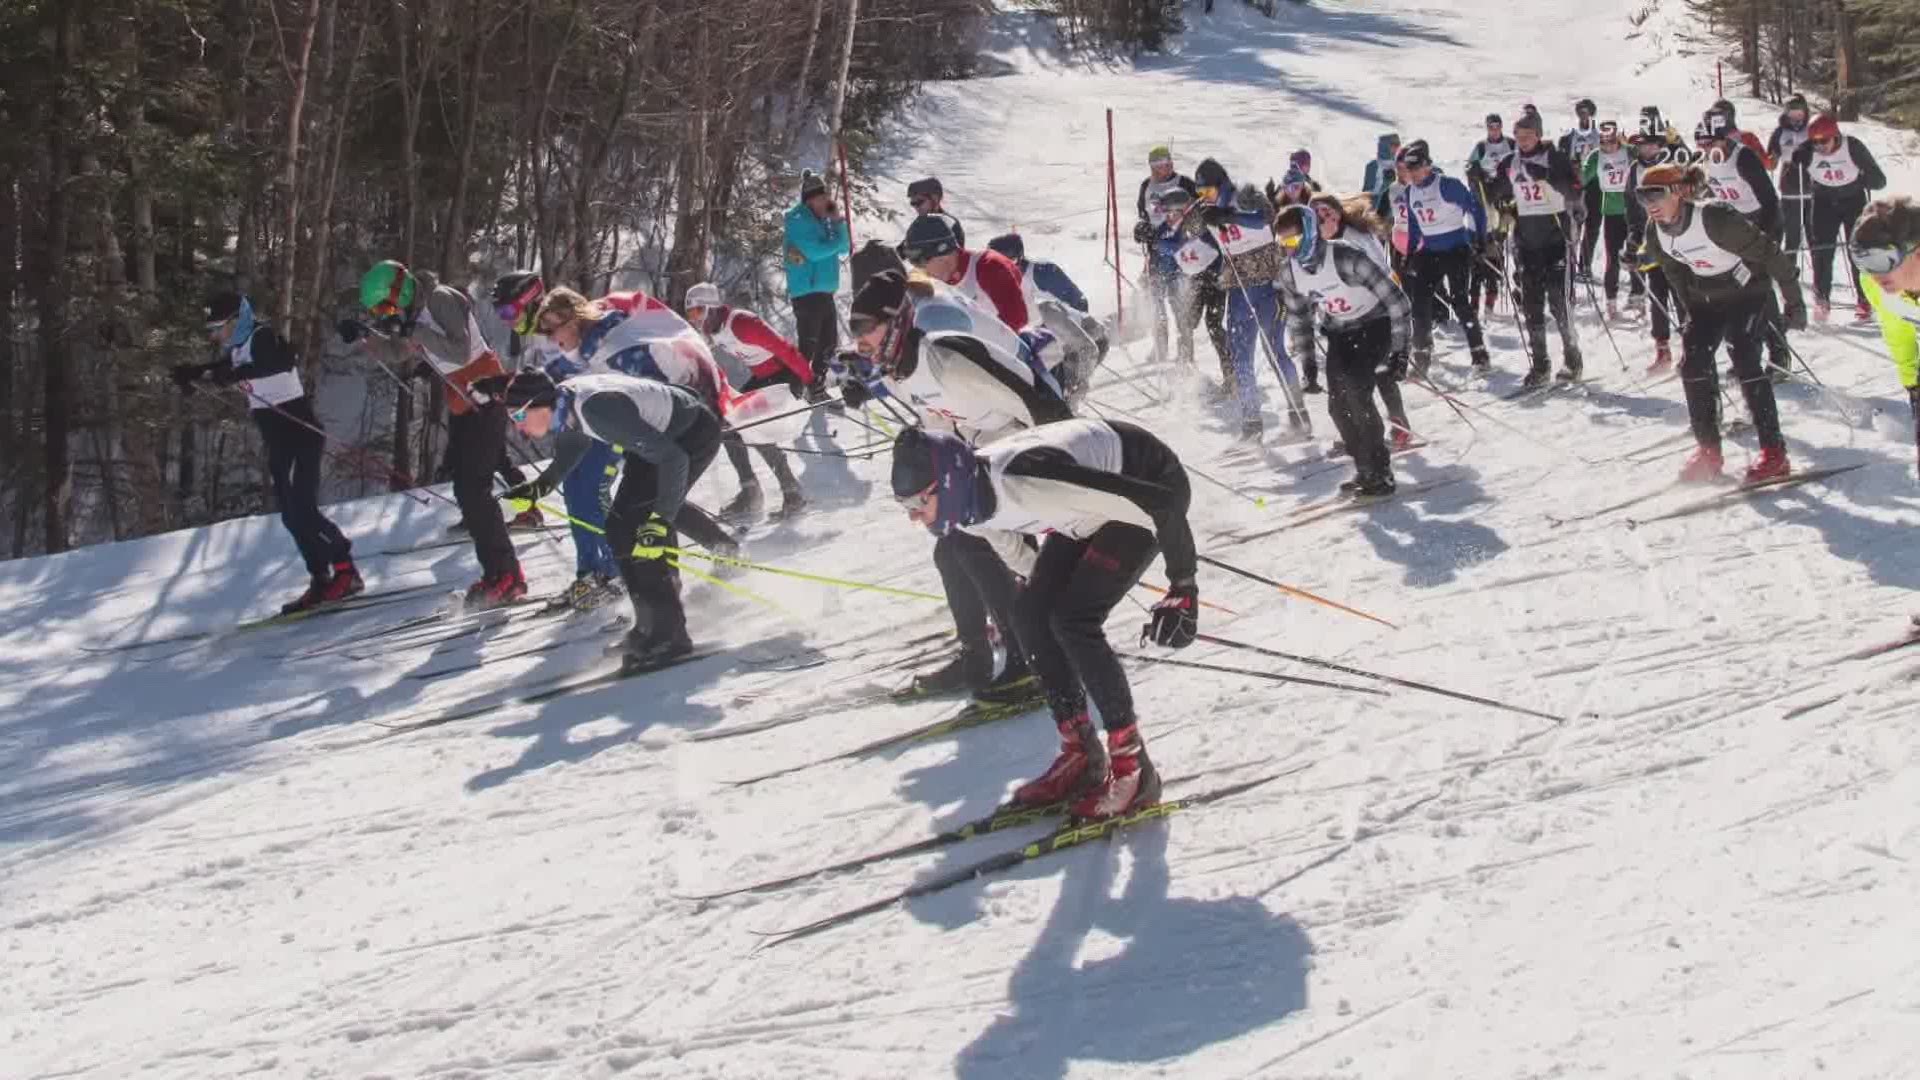 Sugarloaf will be holding their annual Inferno event on Sunday, pitting some nordic skiers against downhill terrain for an intense race down the mountain.